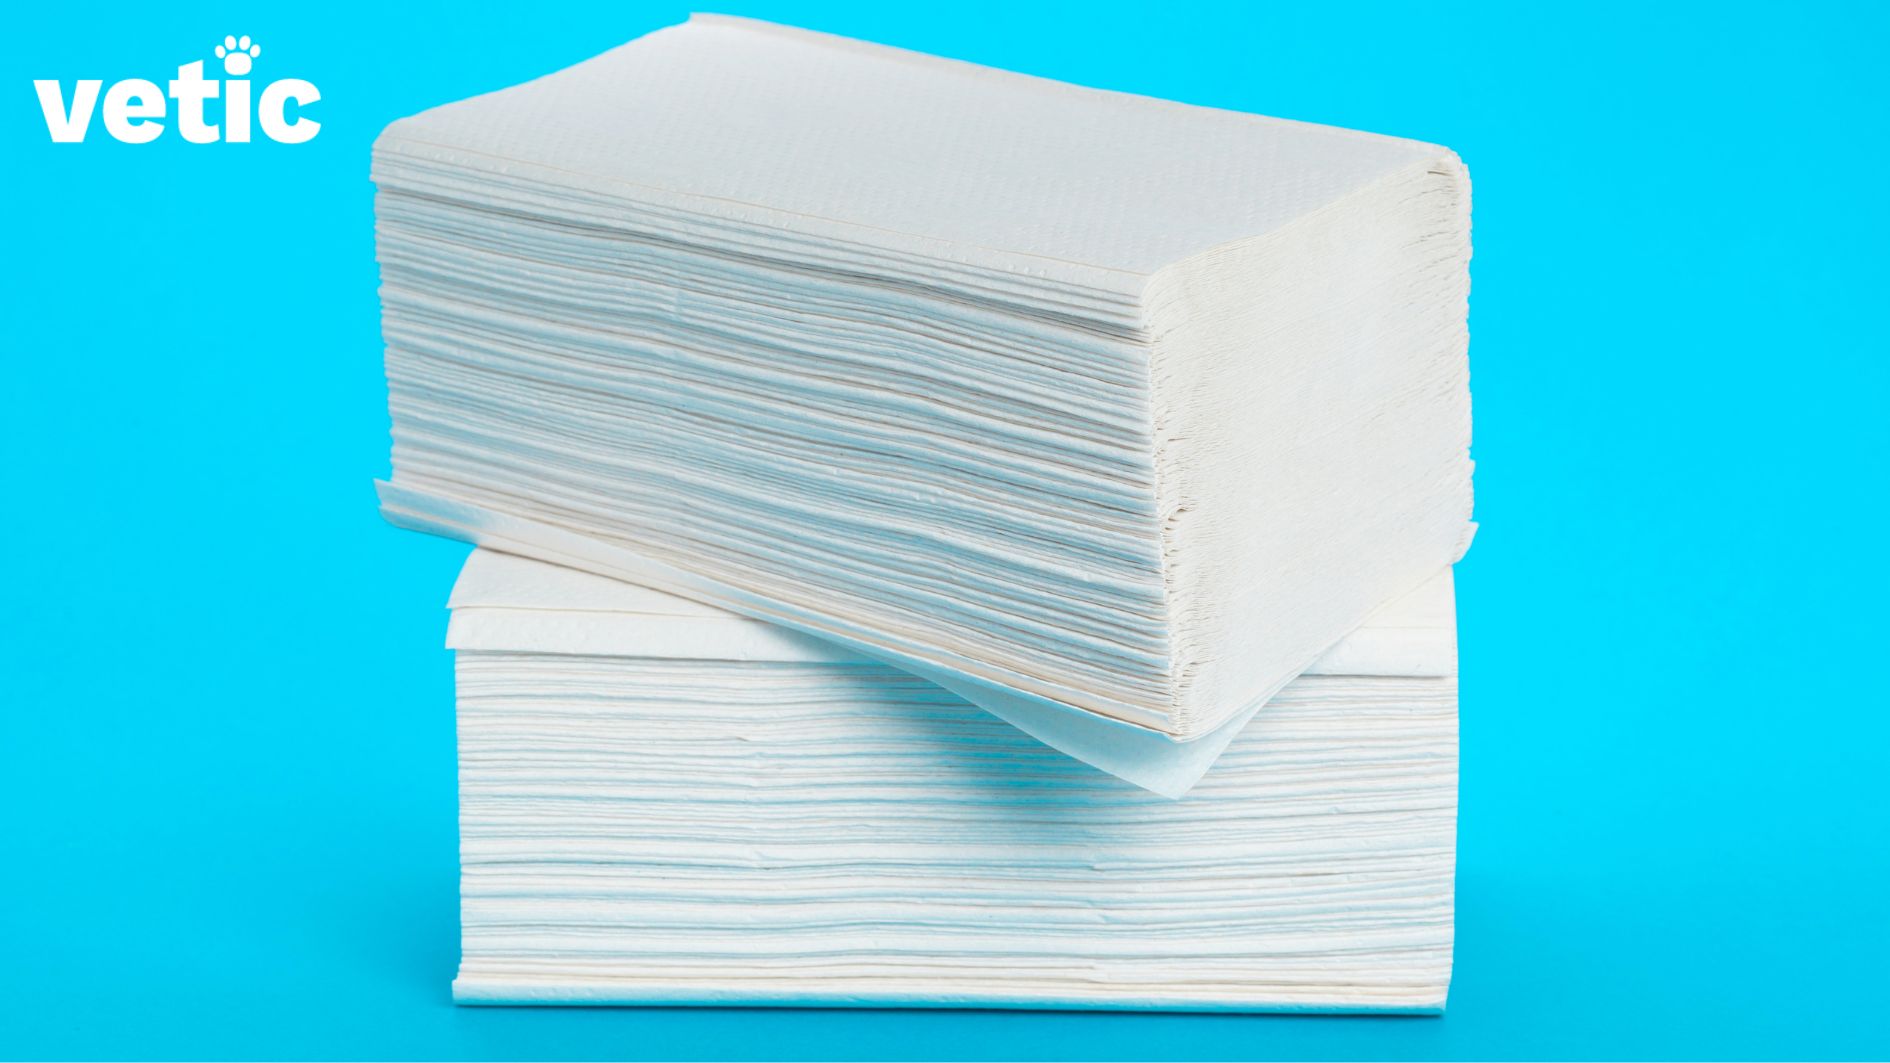 A stack of diaper sheets